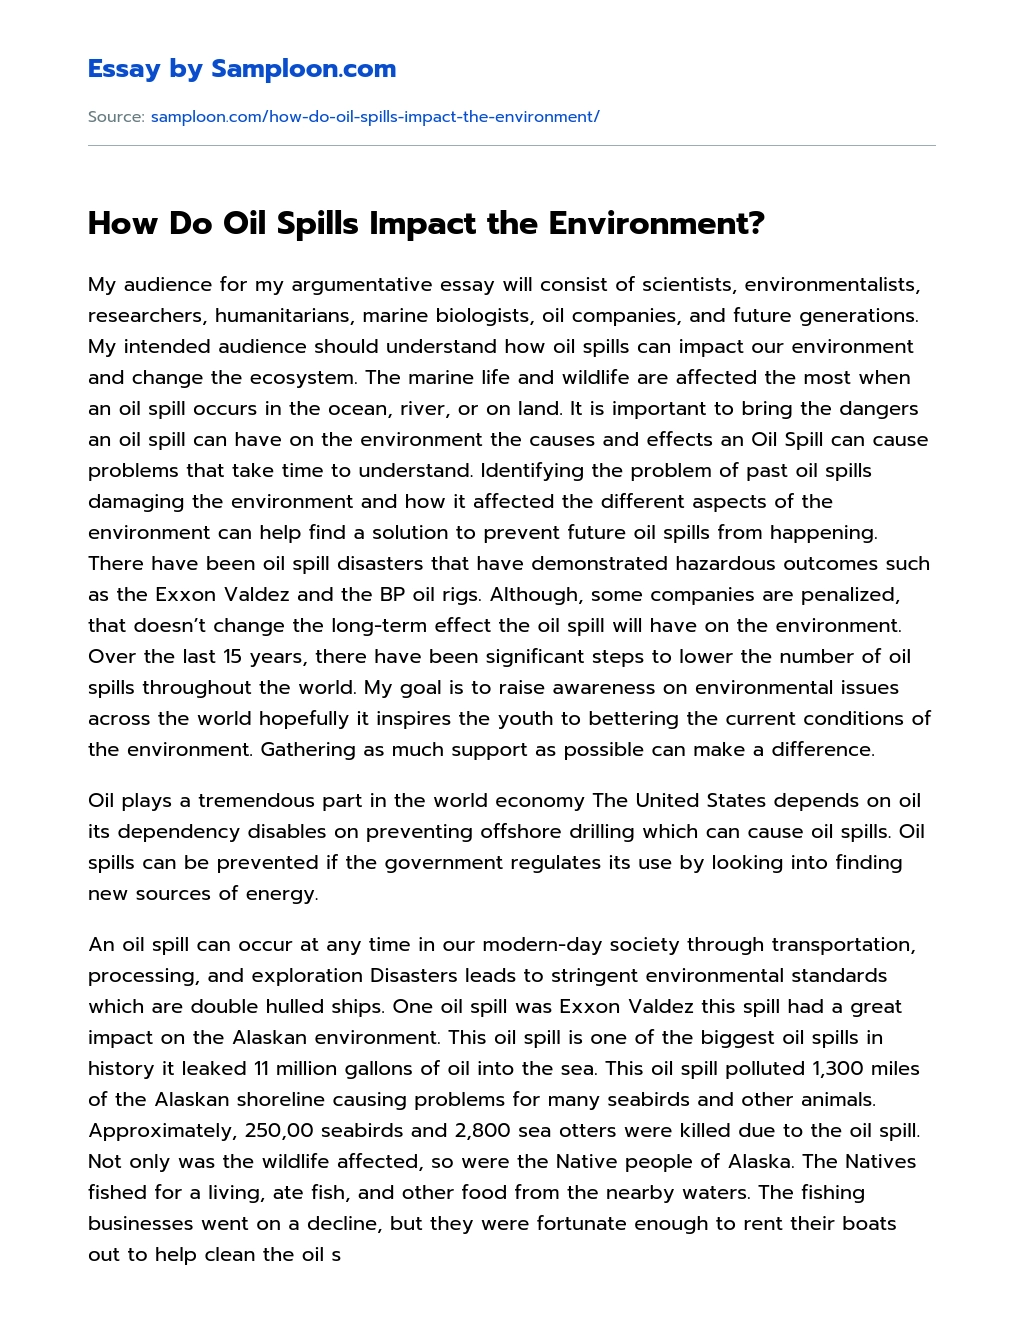 How Do Oil Spills Impact the Environment? essay